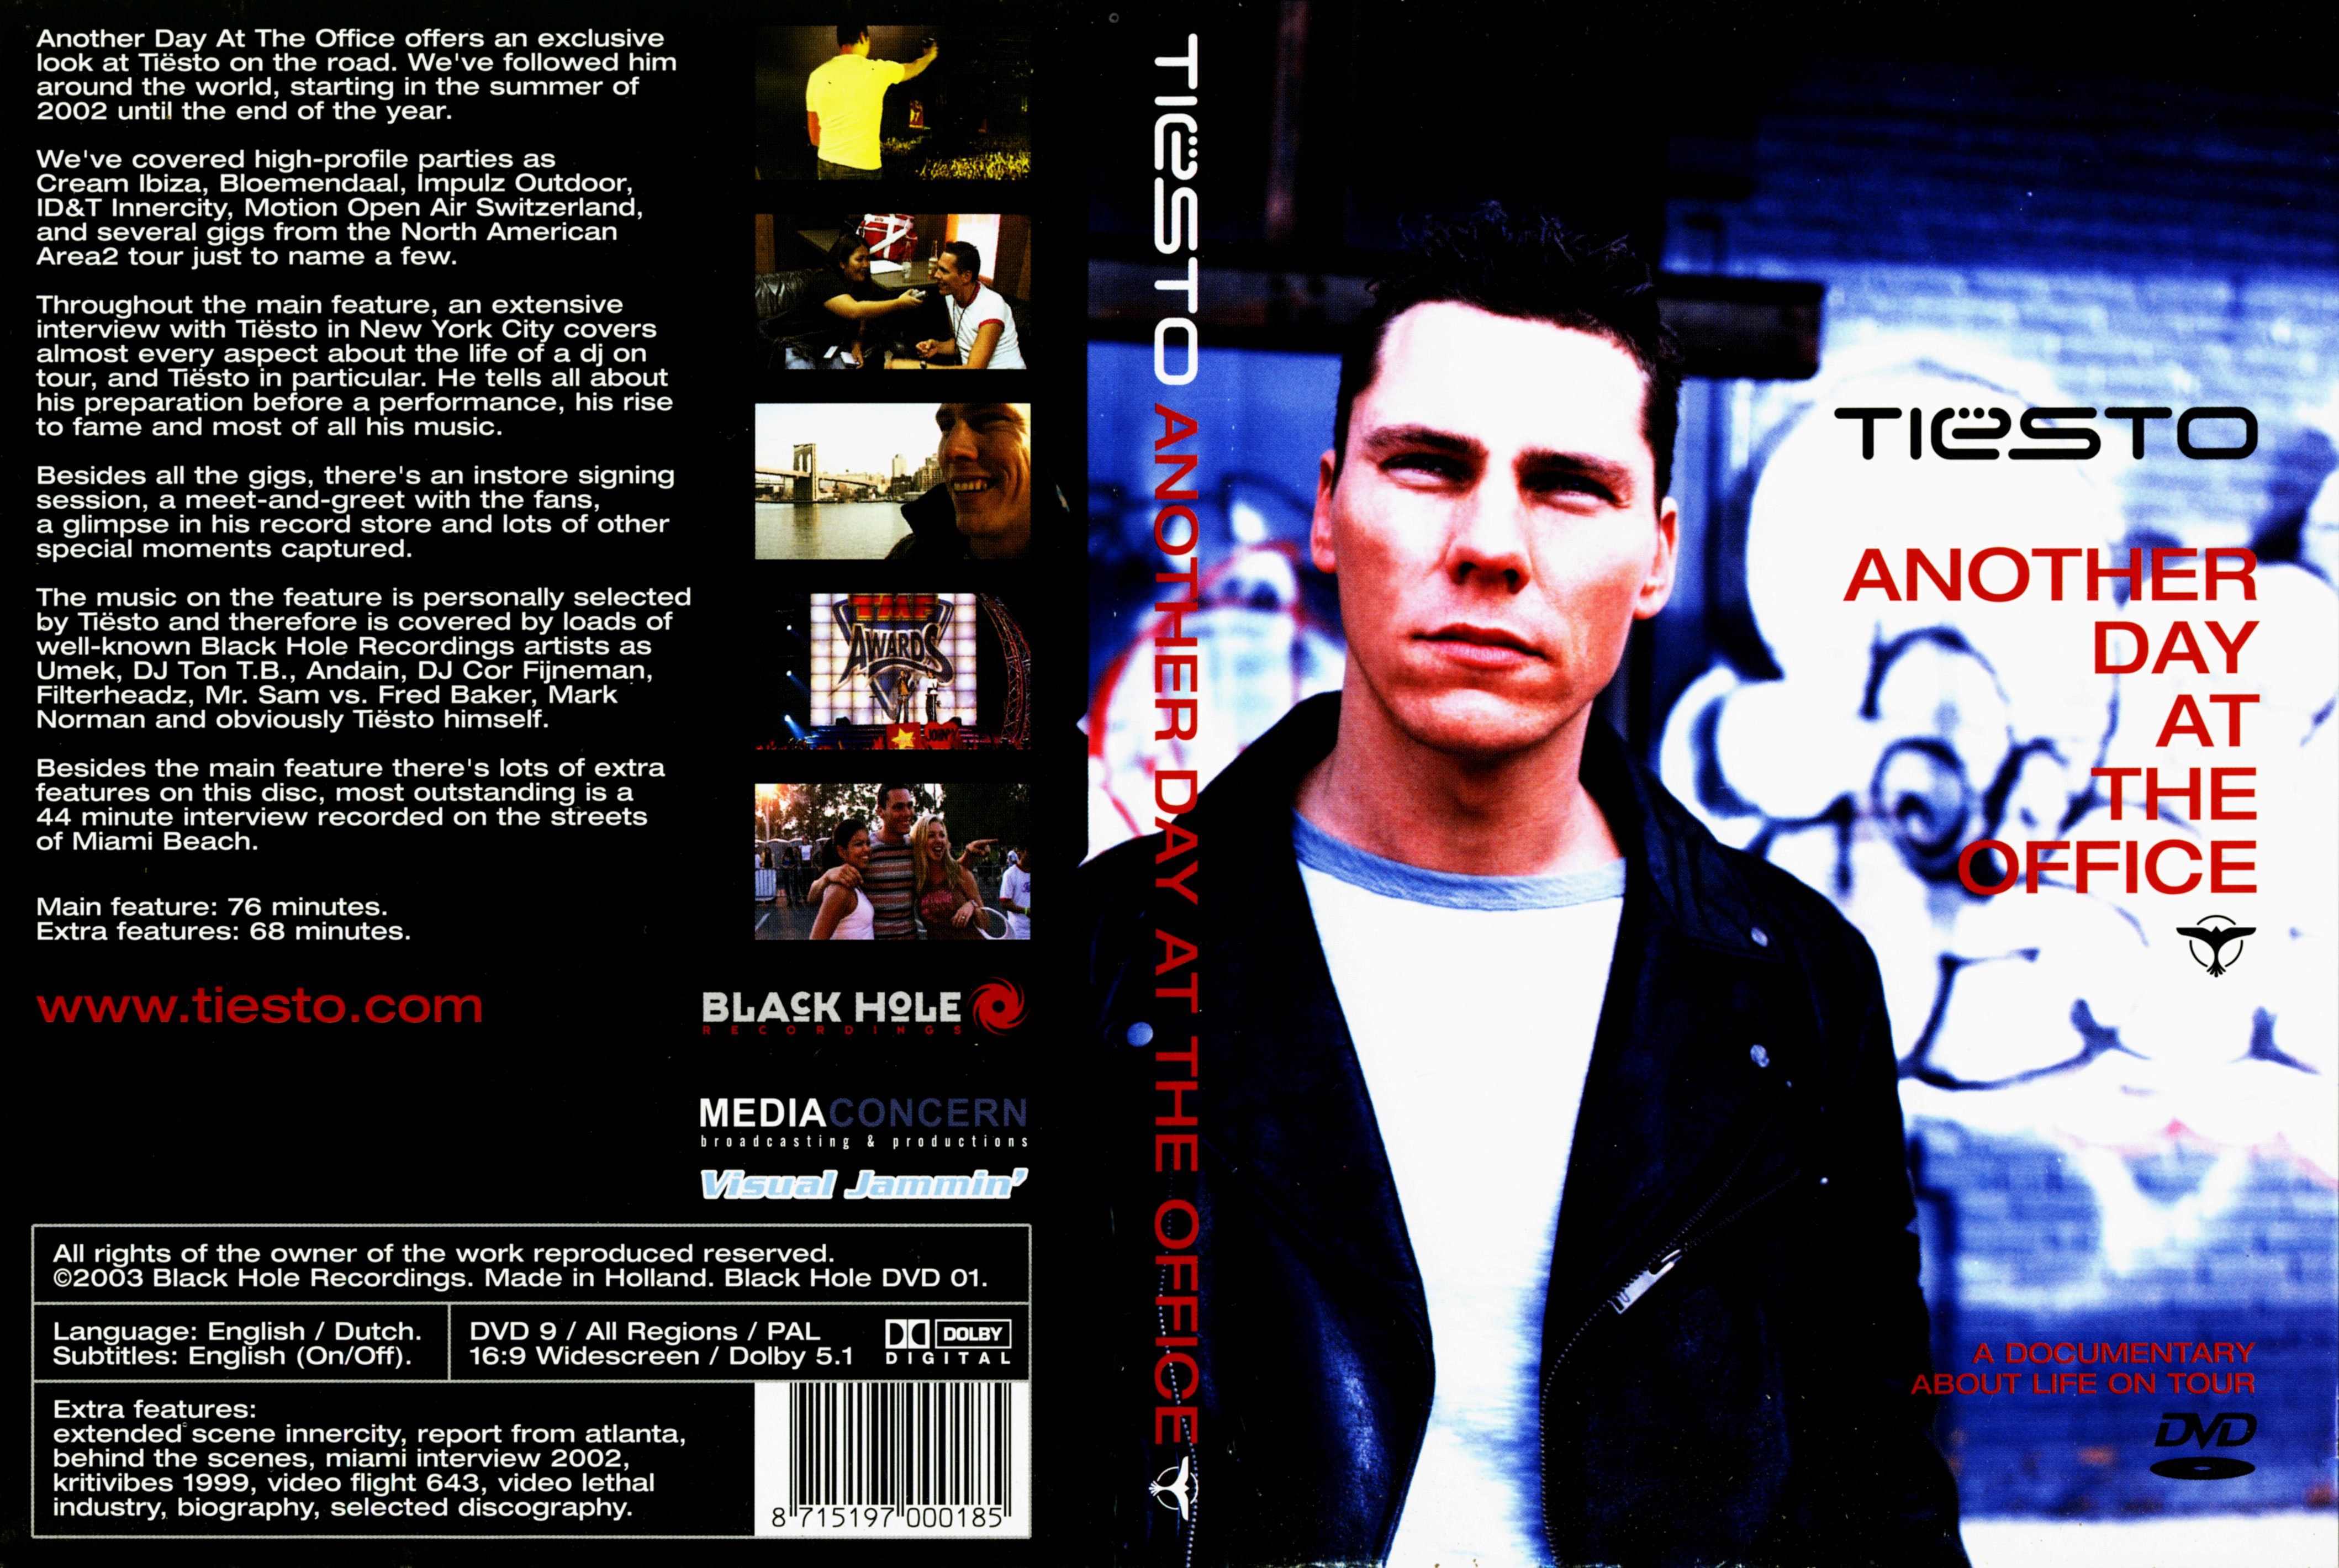 Jaquette DVD Tiesto Another day at the office